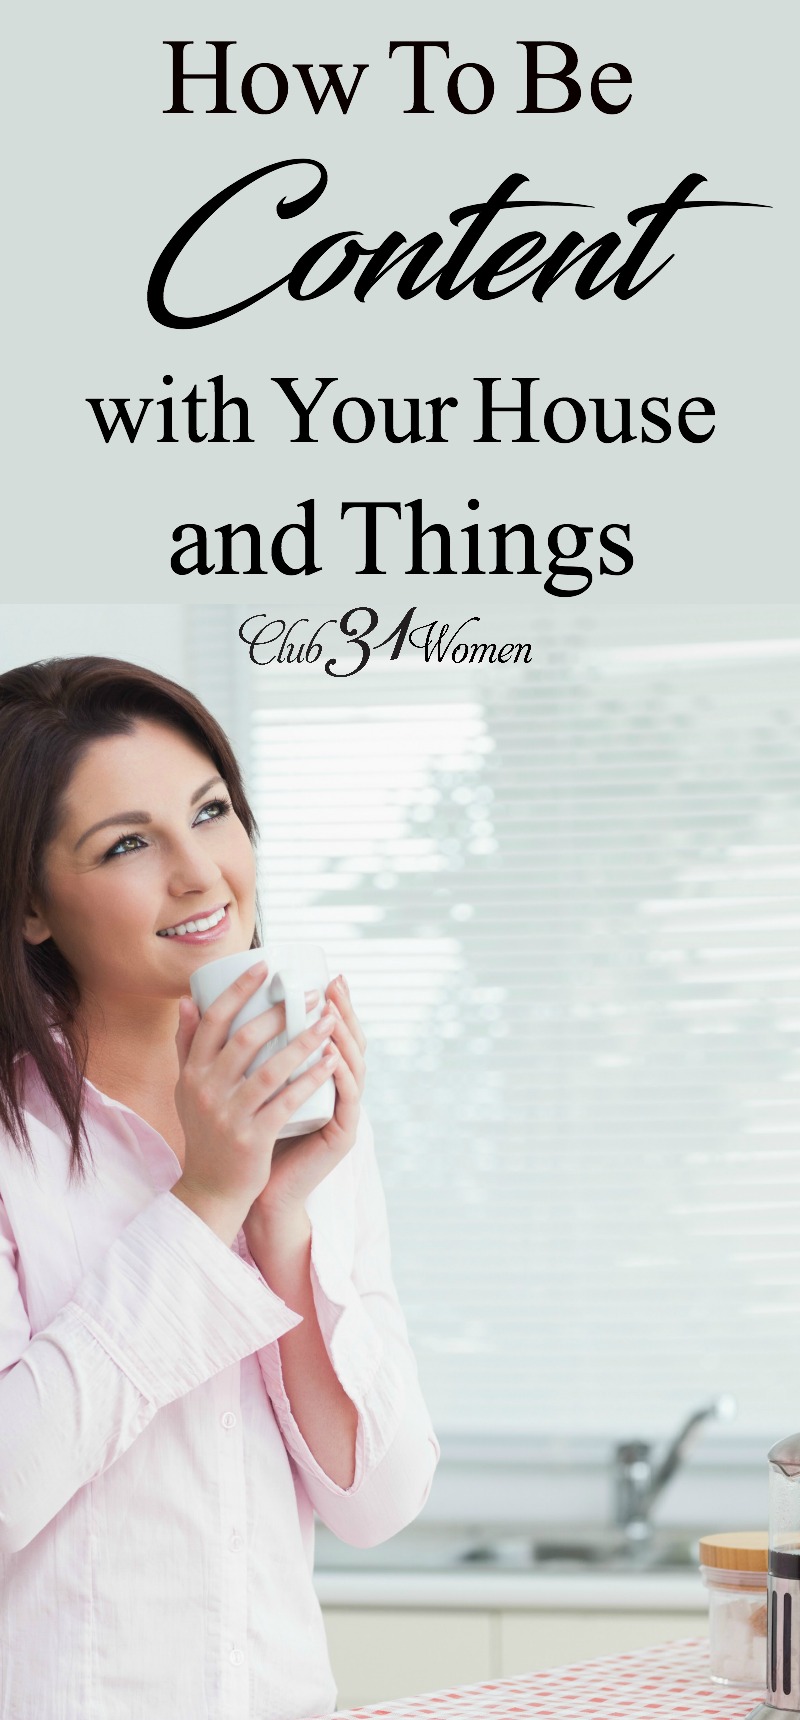 It's not hard to envy what other people have and compare their nice things to our old, worn things. But a dose of perspective can help us be content. via @Club31Women